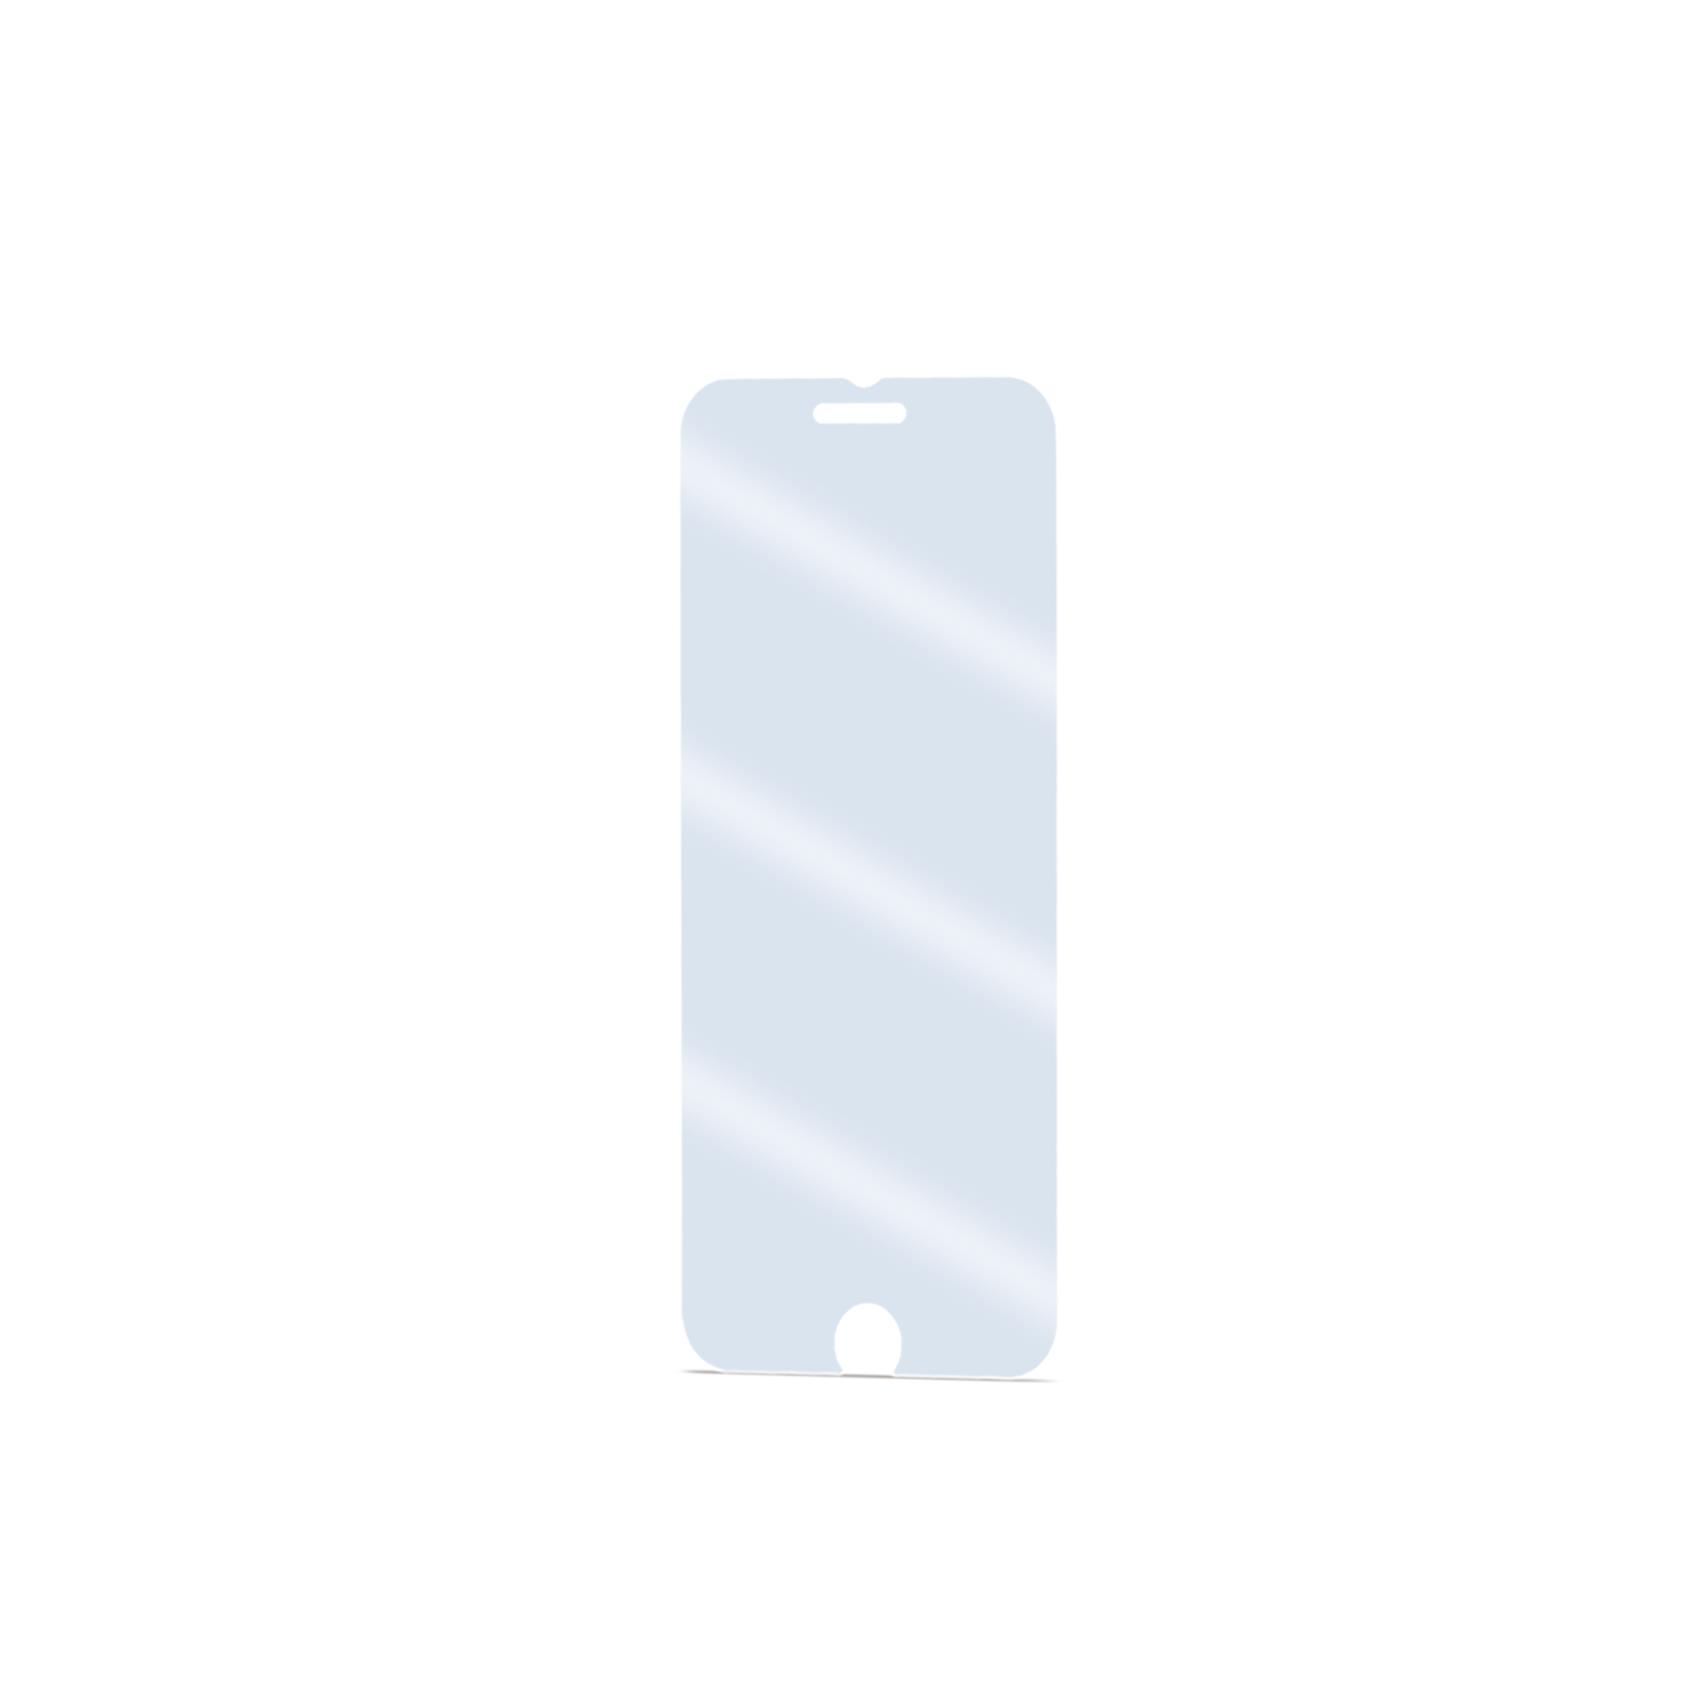 GLASS ANTIBLUE RAY IPHONE 8/7/6S/6